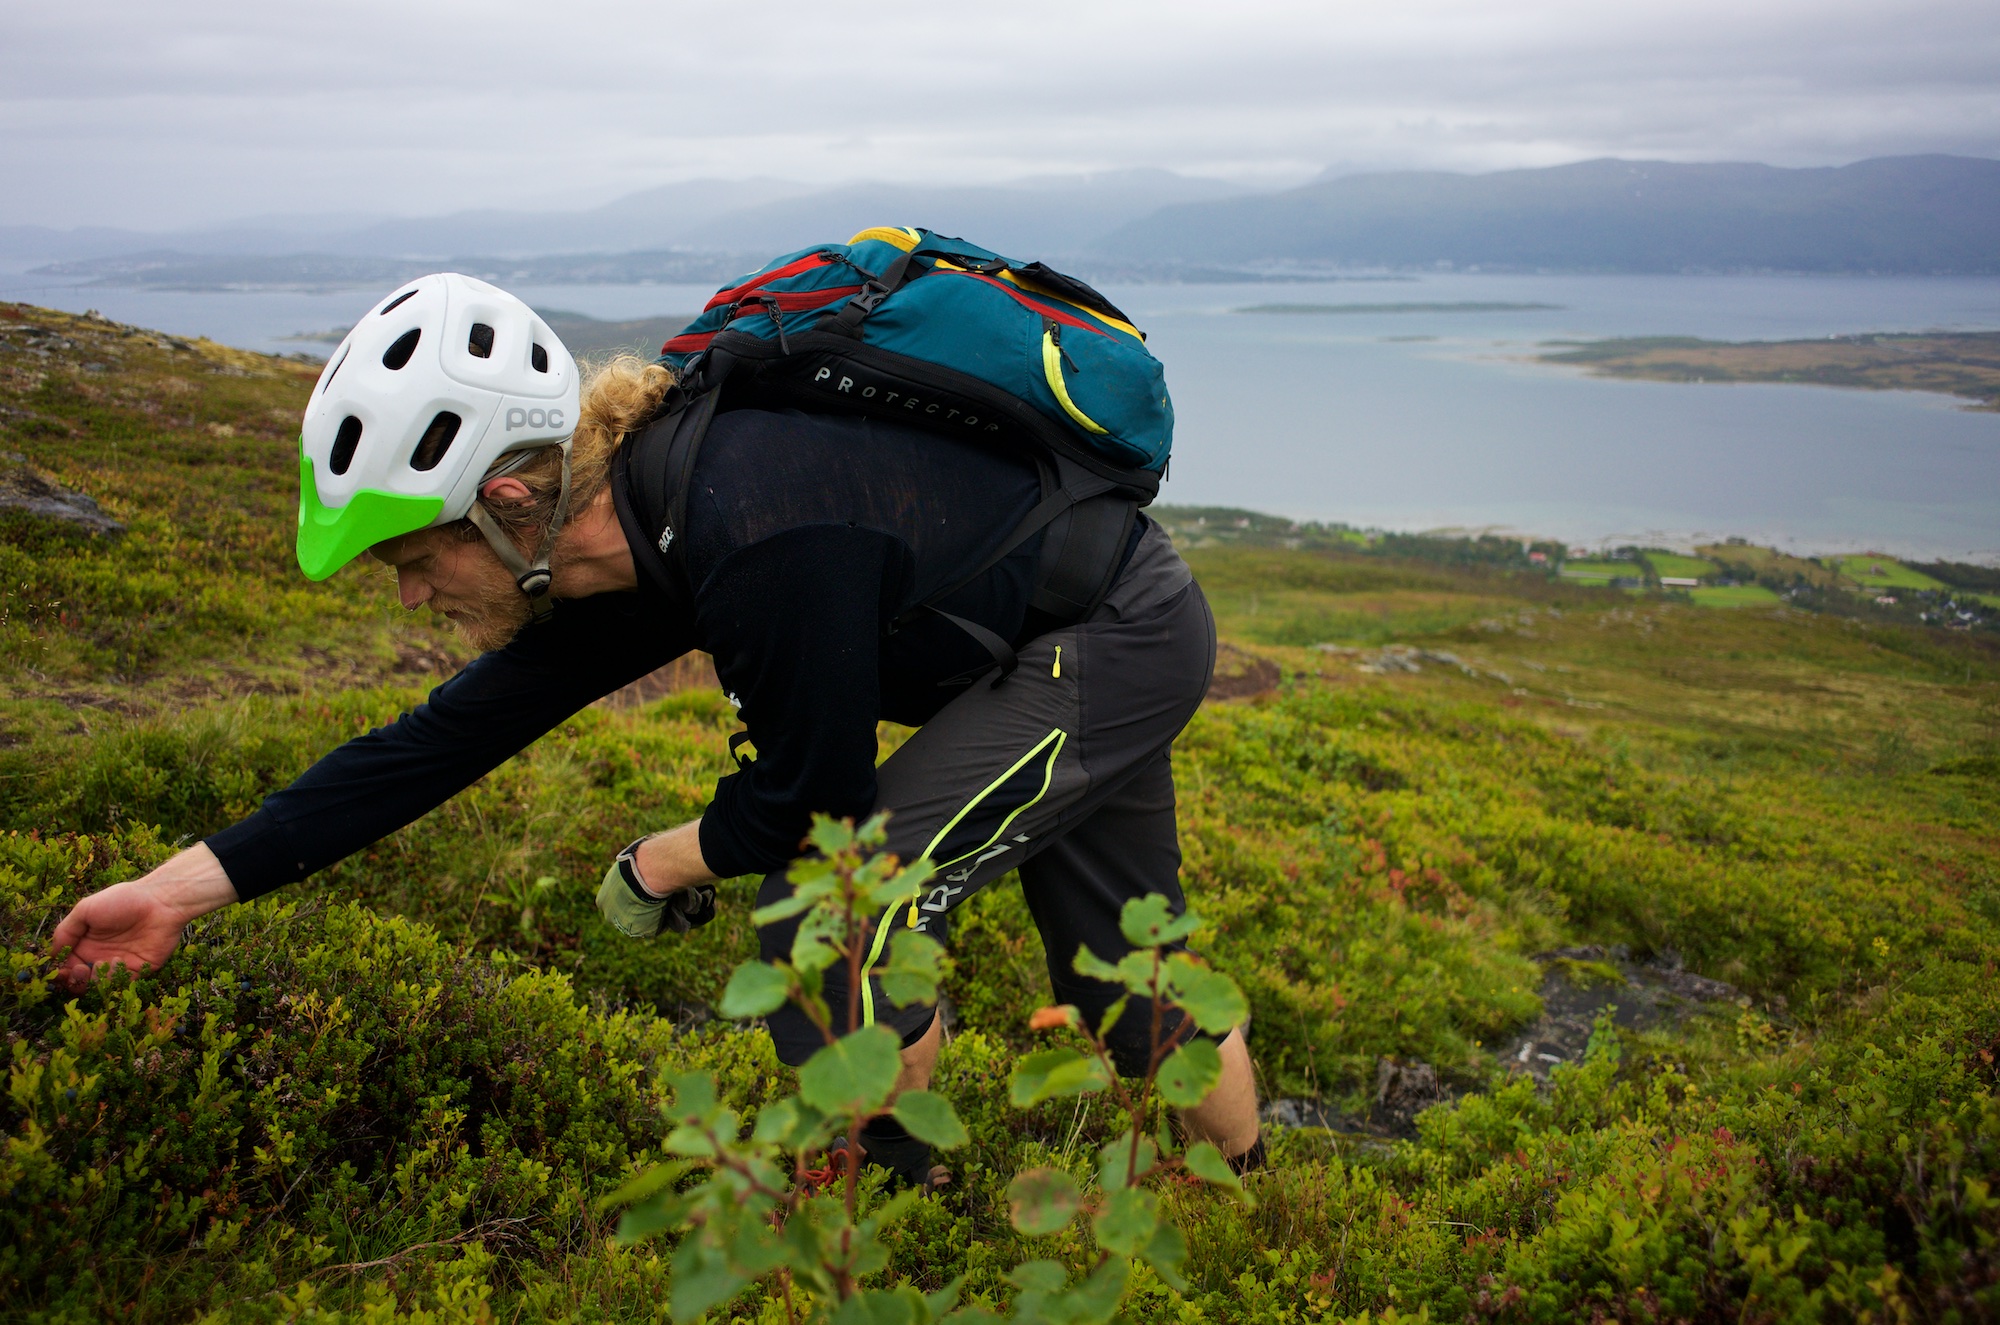 Gustav enjoys ripe blueberries above treeline, it's that time of the year. Somewhere down in that fjord is the last resting place of German battleship Tirpitz, sunk by RAF bombers in 1944.